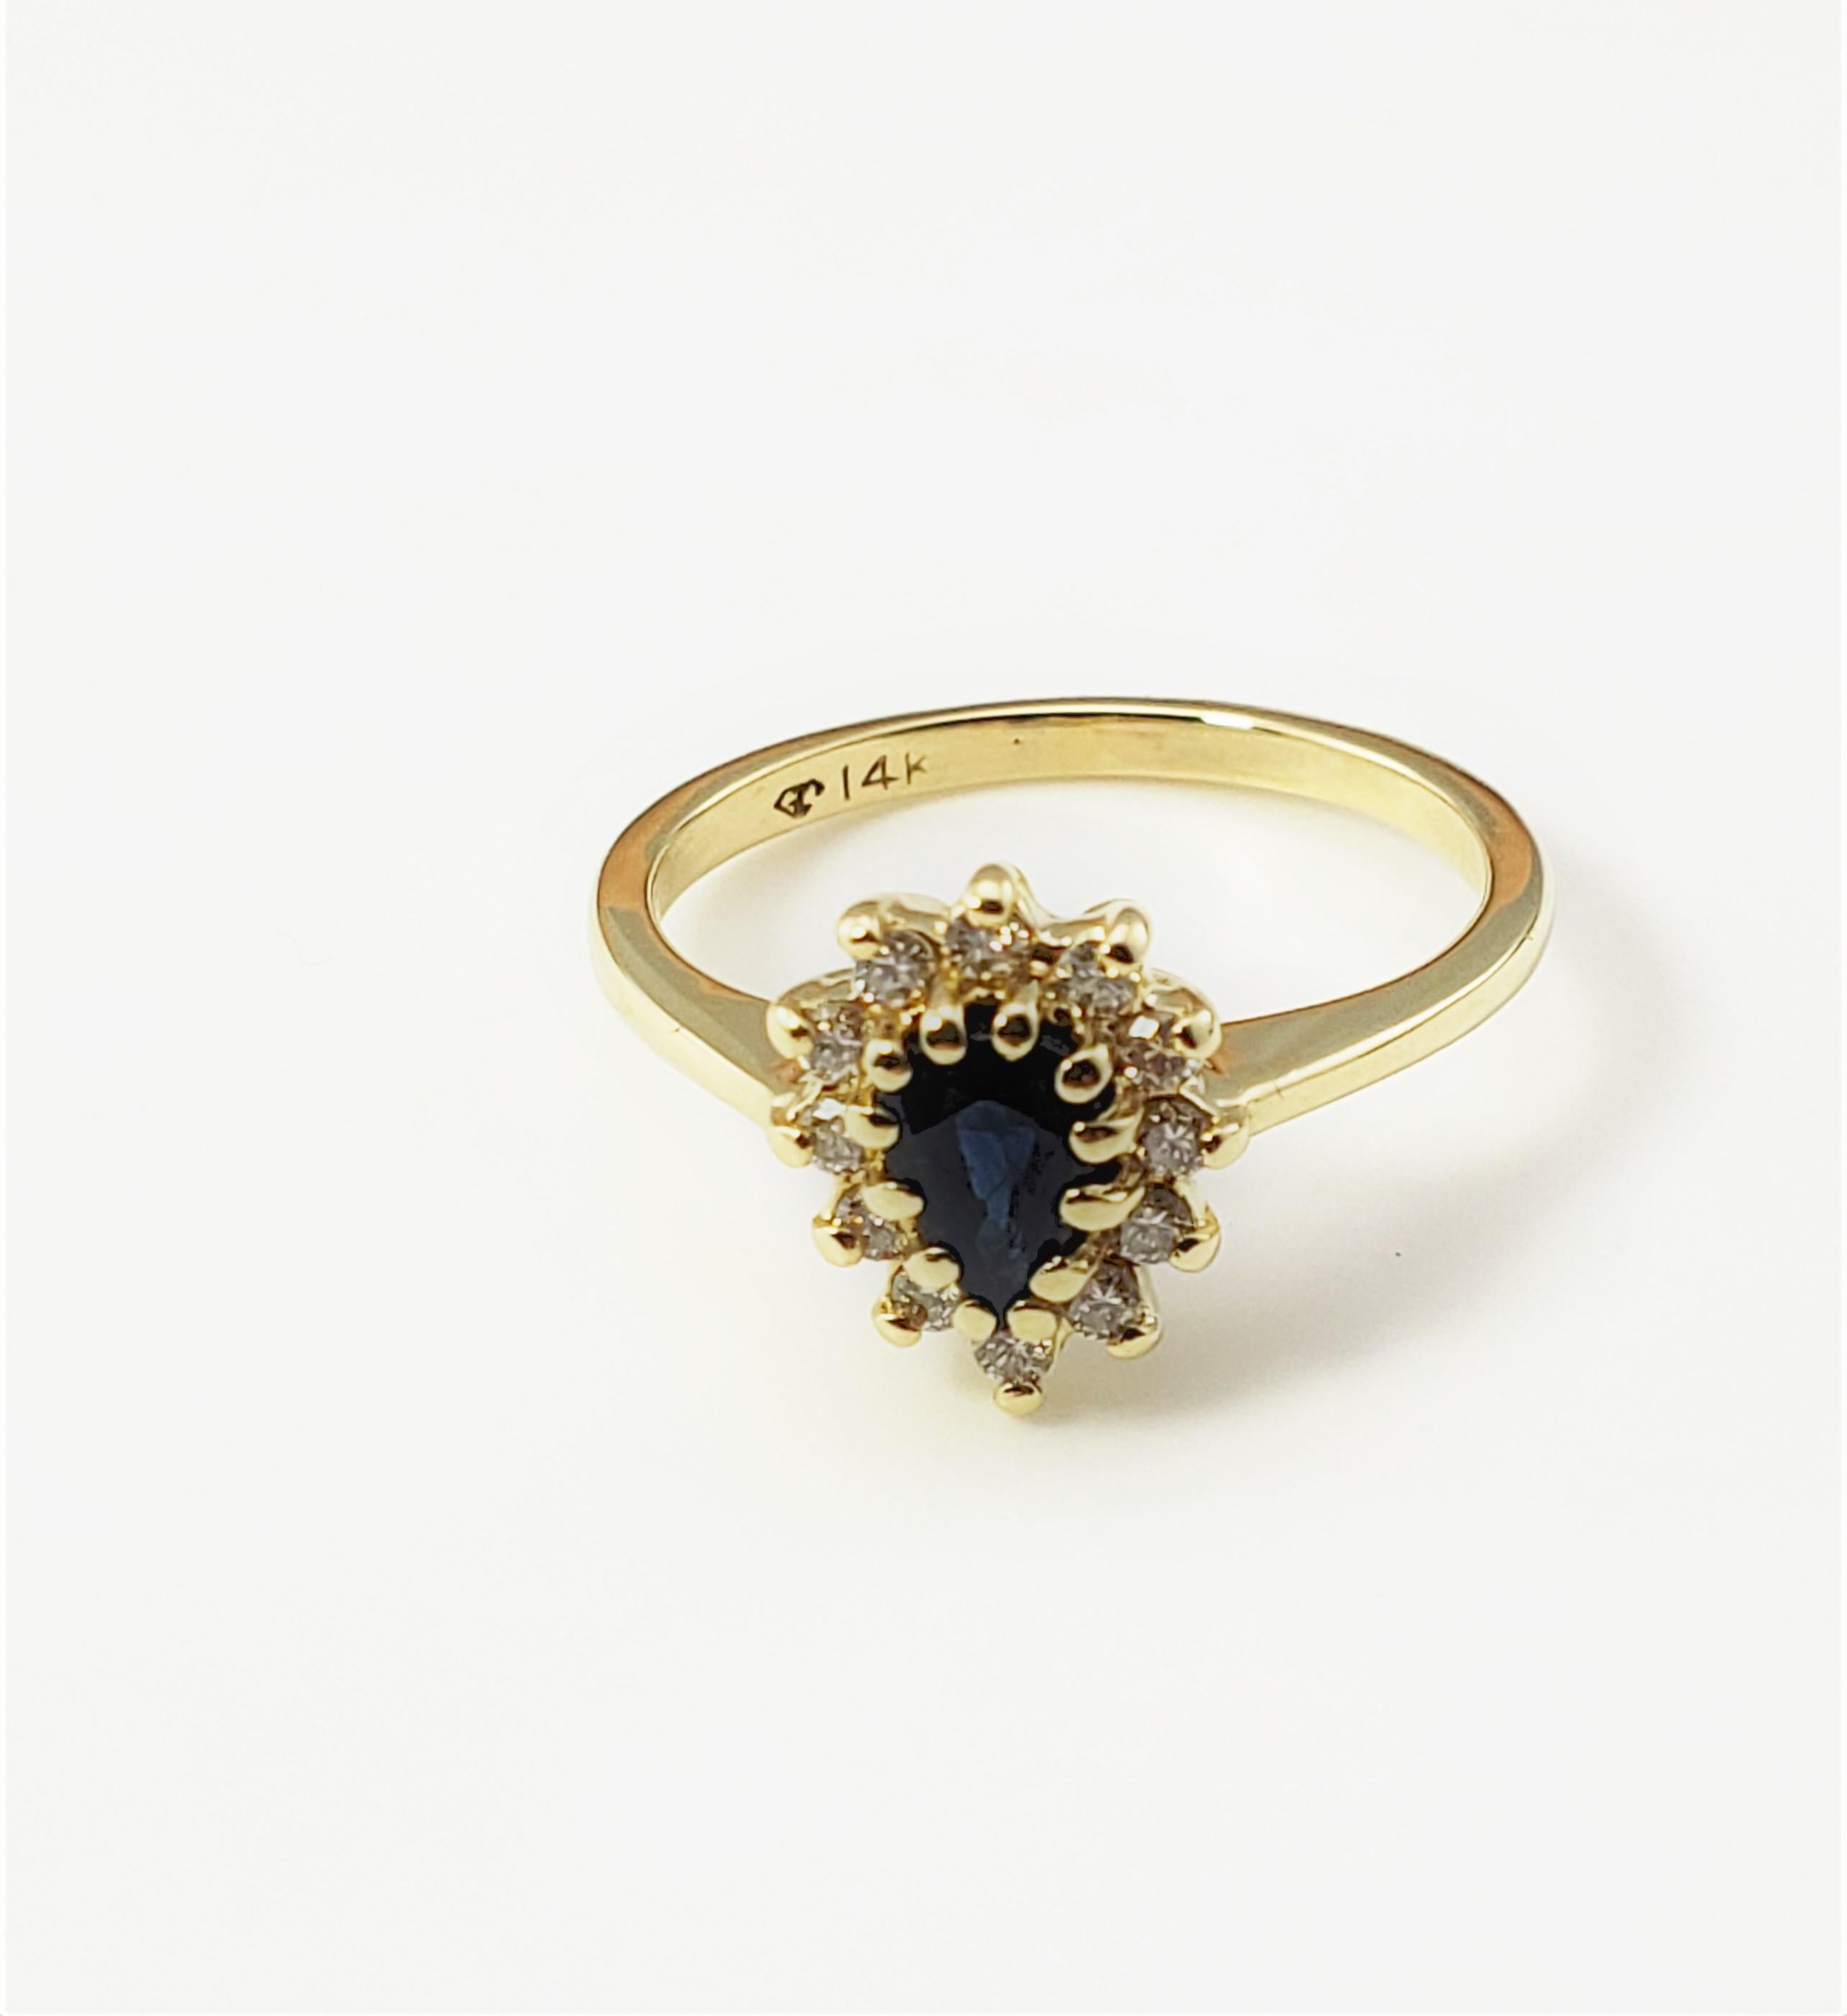 14 Karat Yellow Gold Sapphire and Diamond Ring Size 5.75-

This lovely ring features one pear shaped sapphire (6 mm x 4 mm) and 12 round brilliant cut diamonds set in classic 14K yellow gold.
Top of ring measures 10 mm x 8 mm.  Shank measures 2